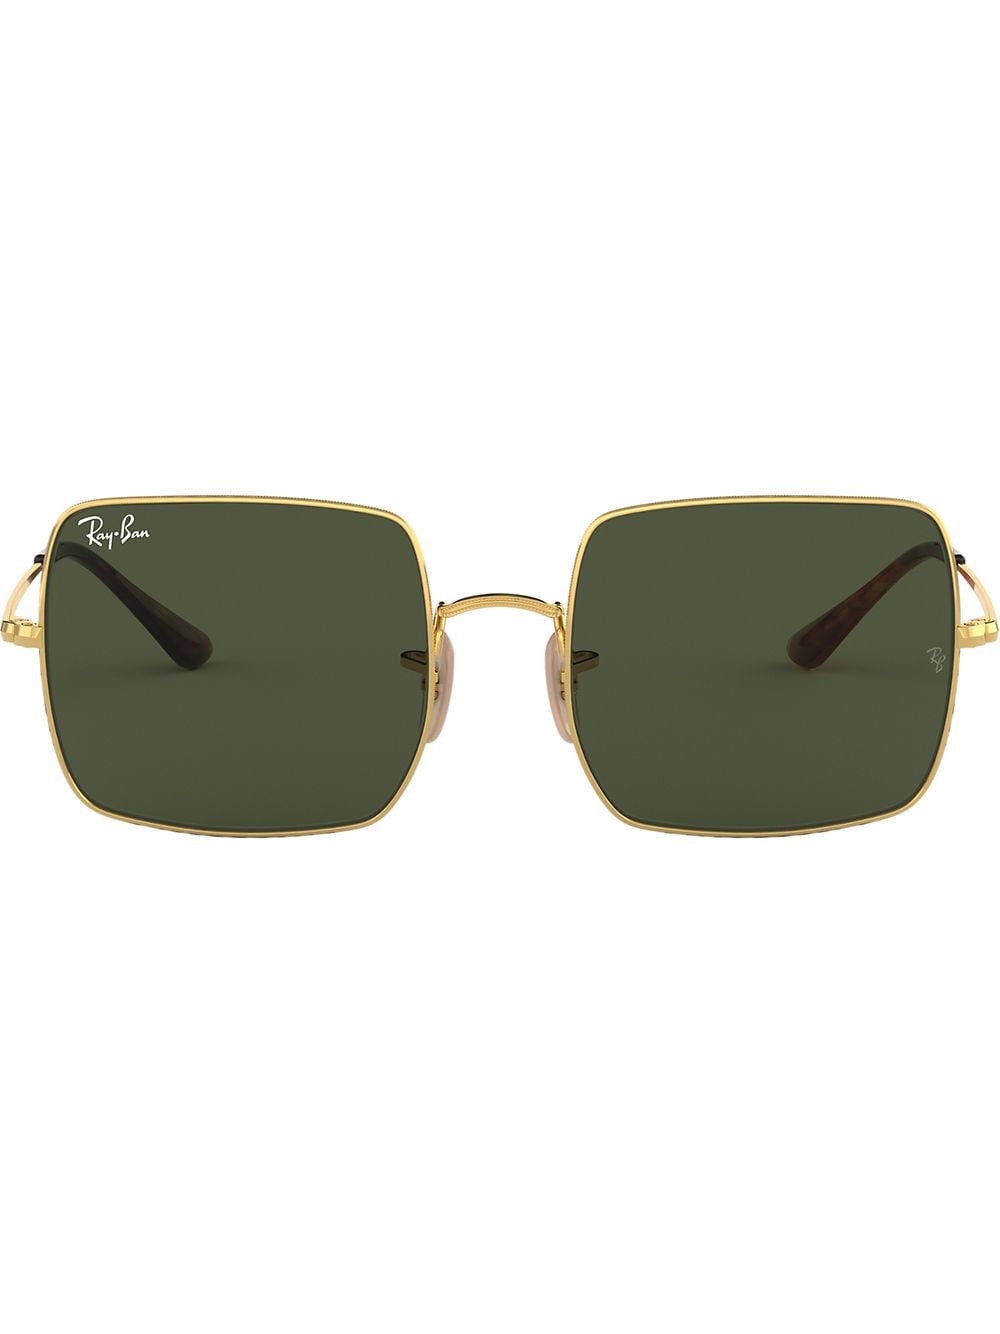 Ray-Ban RB1971 square sunglasses - Gold von Ray-Ban